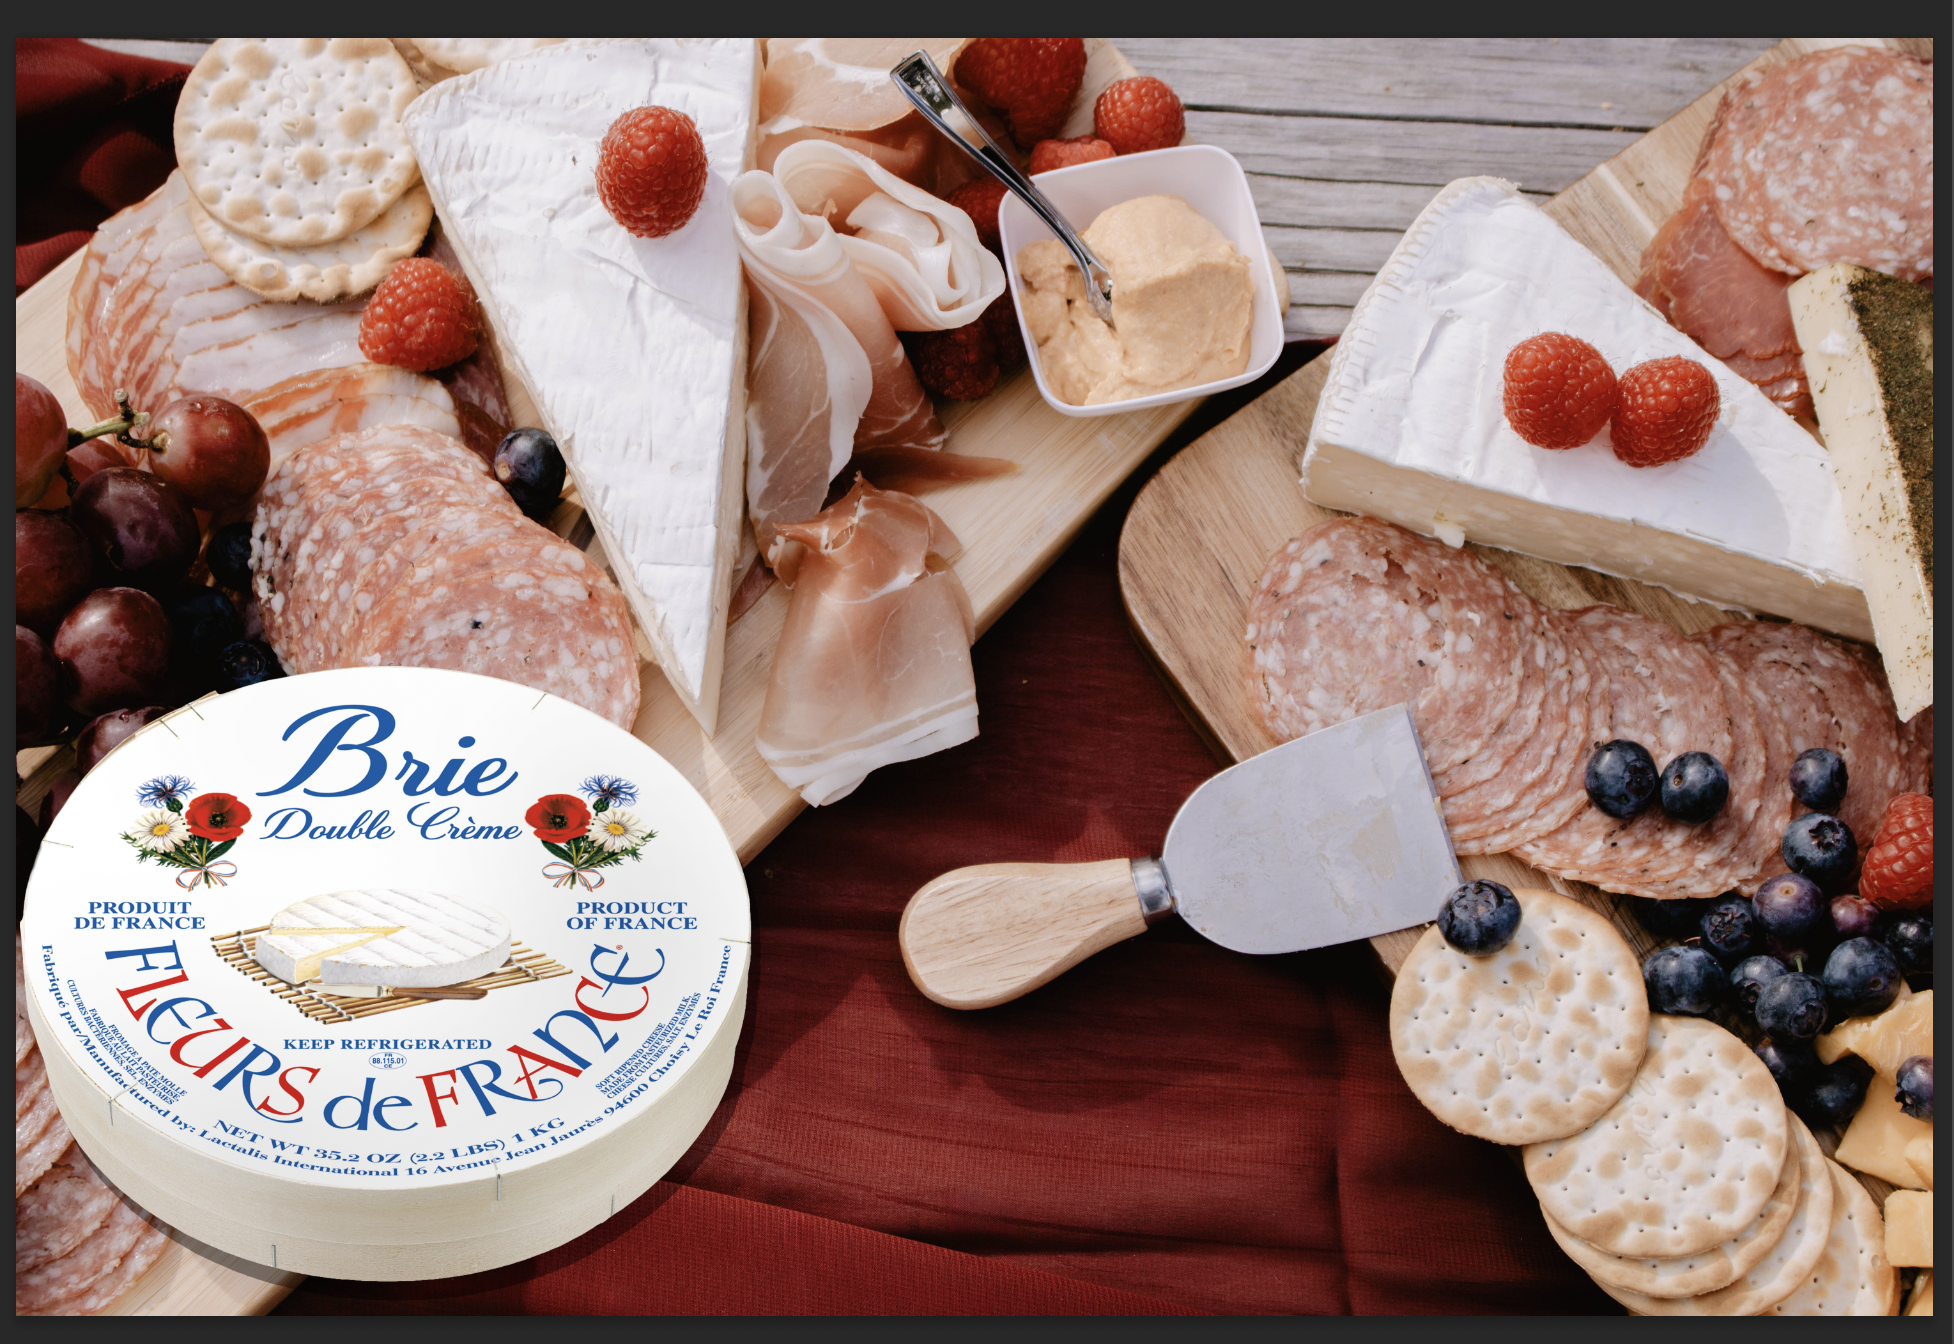 October Cheese of the Month - Brie wedge fleur de france